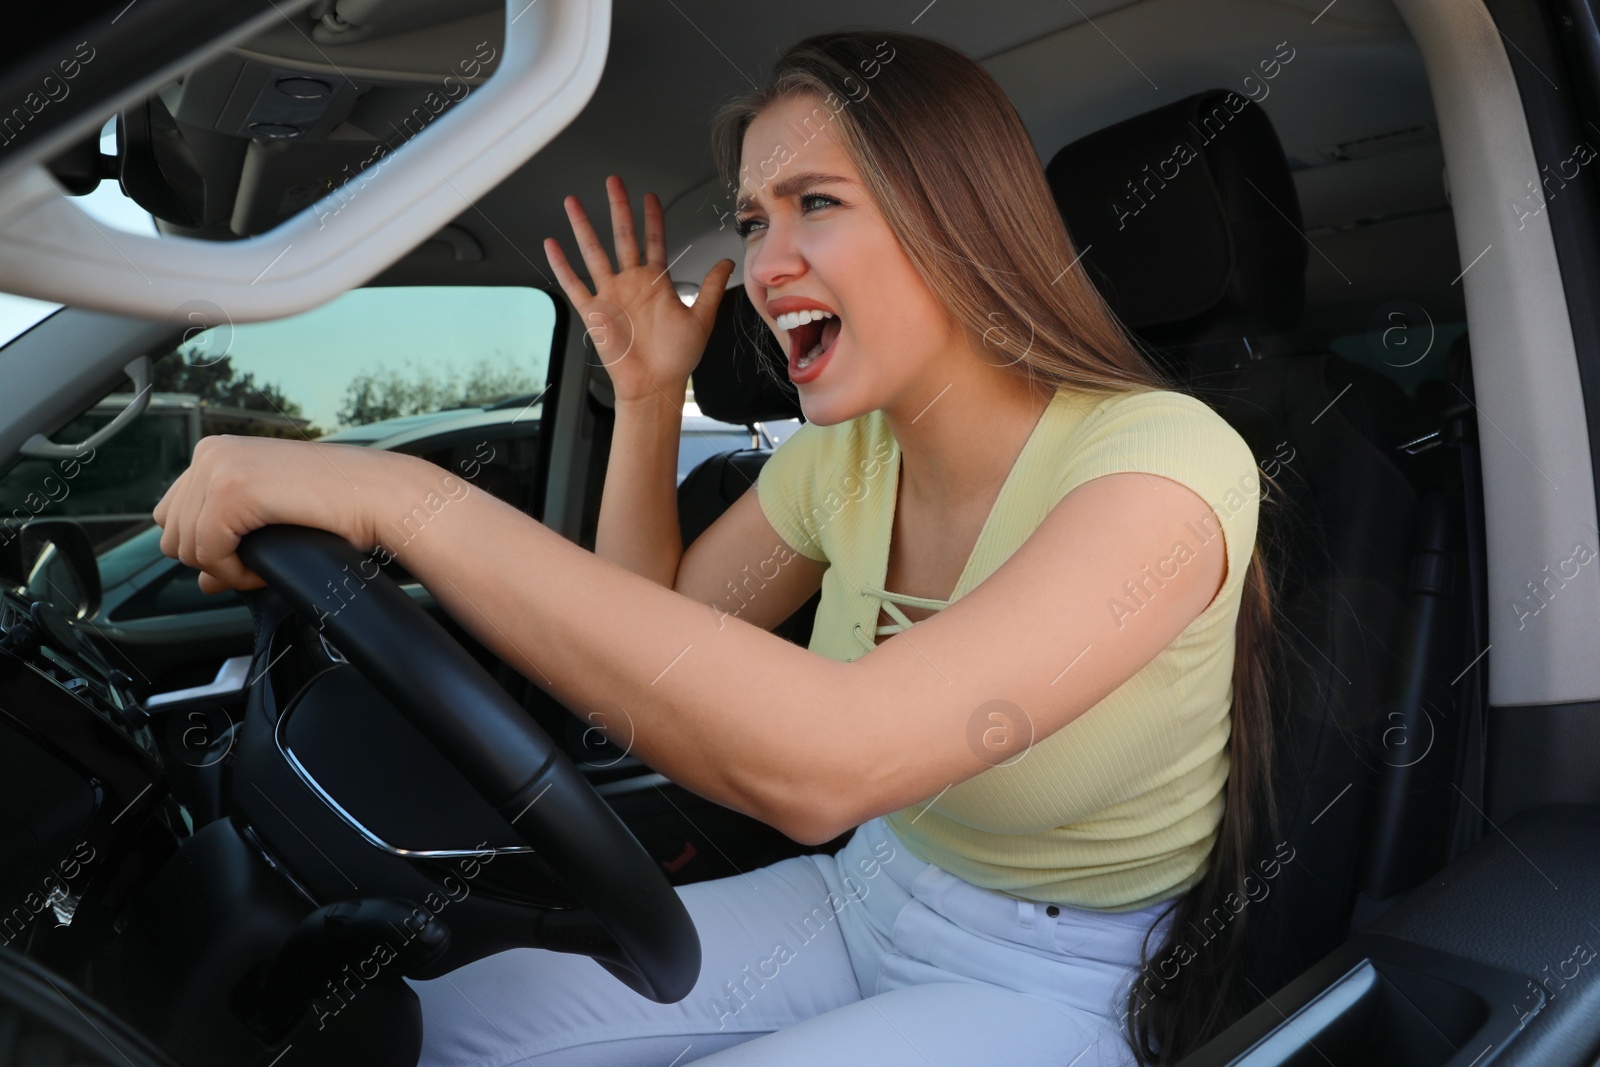 Photo of Emotional woman in car. Aggressive driving behavior